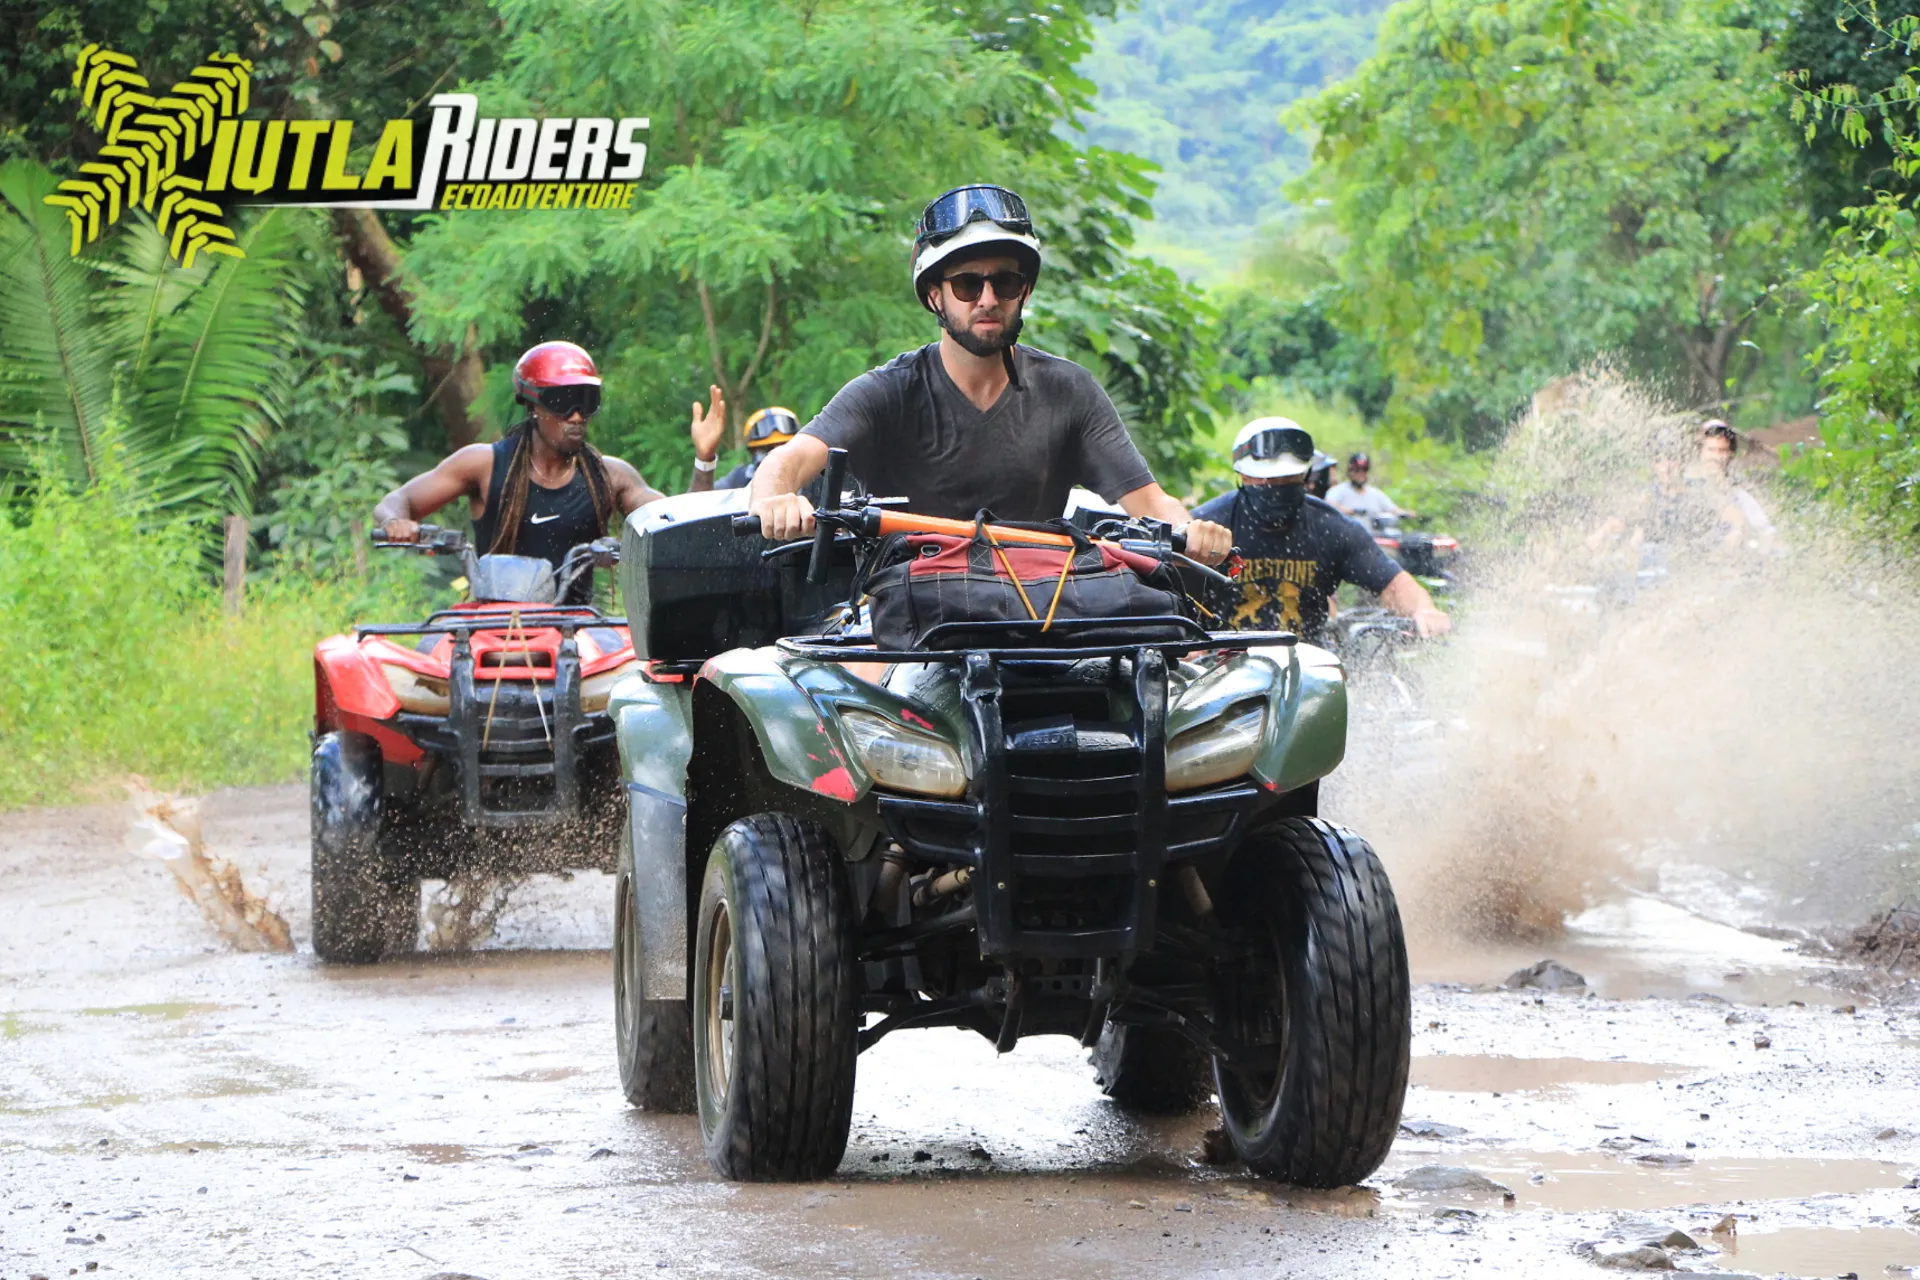 A group of people renting ATVs for a muddy trail adventure.